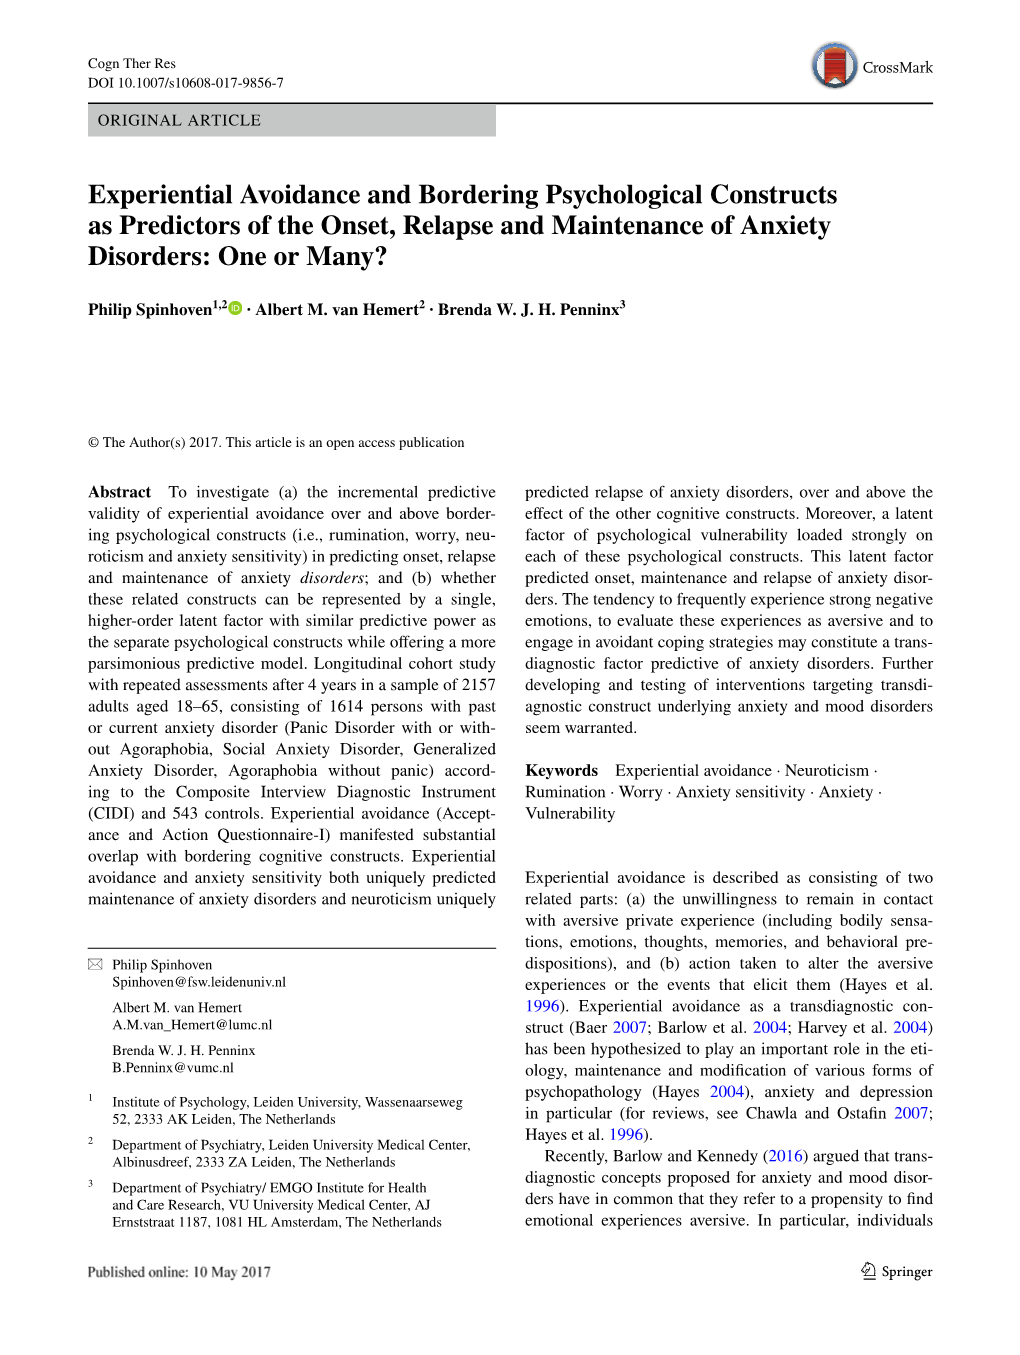 Experiential Avoidance and Bordering Psychological Constructs As Predictors of the Onset, Relapse and Maintenance of Anxiety Disorders: One Or Many?